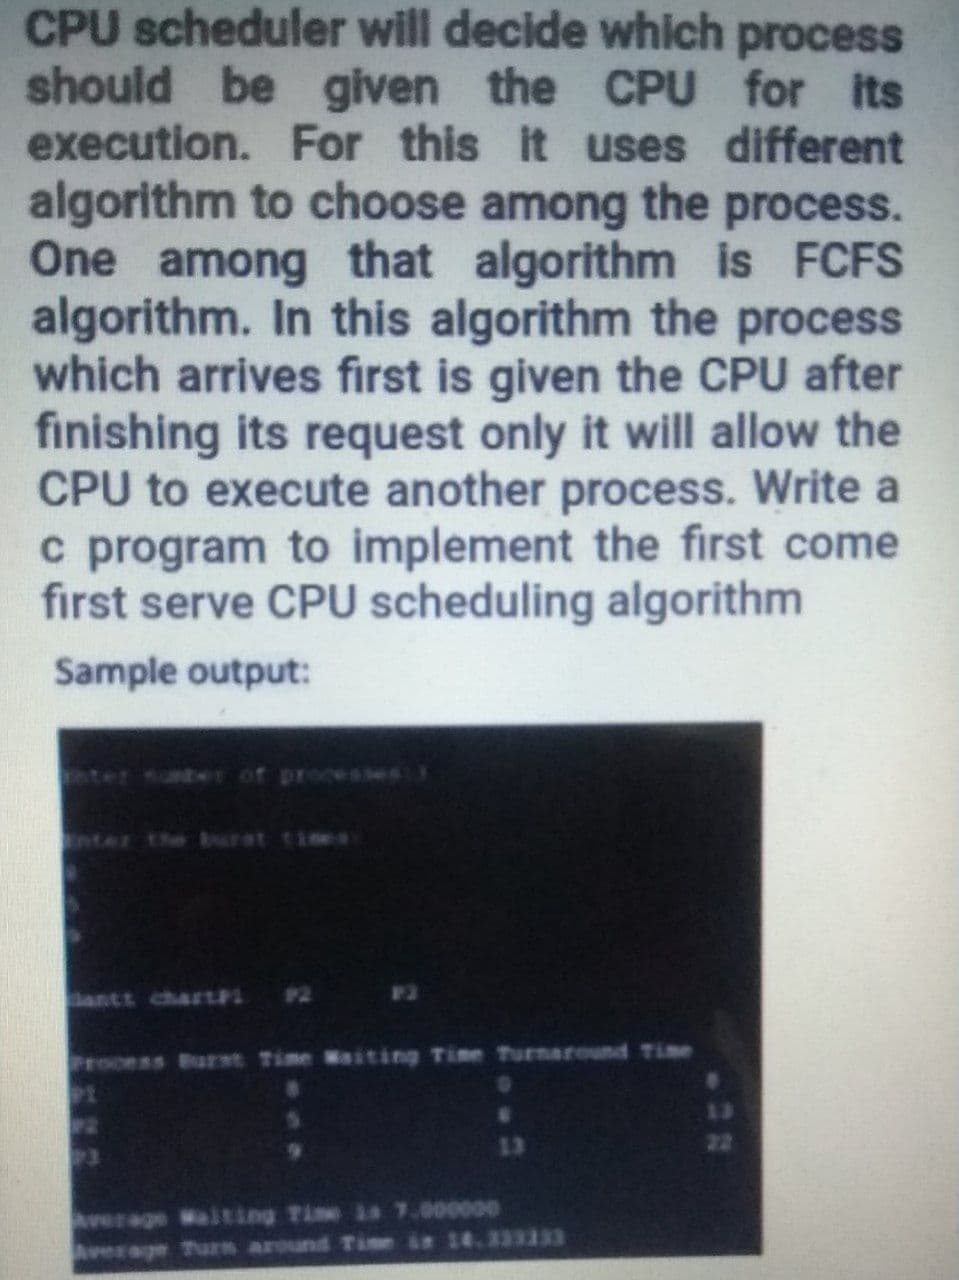 CPU scheduler will decide which process
should be given the CPU for its
execution. For this it uses different
algorithm to choose among the process.
One among that algorithm is FCFS
algorithm. In this algorithm the process
which arrives first is given the CPU after
finishing its request only it will allow the
CPU to execute another process. Write a
c program to implement the first come
first serve CPU scheduling algorithm
Sample output:
ter unter of processes
ter the burat ties
antt chartPL P2
Process Burst Time Waiting Time Turnaround Time
13
28
23
13
22
verage Waiting Time is 7.0o0000
Average Turn around Tie i 14.333333
